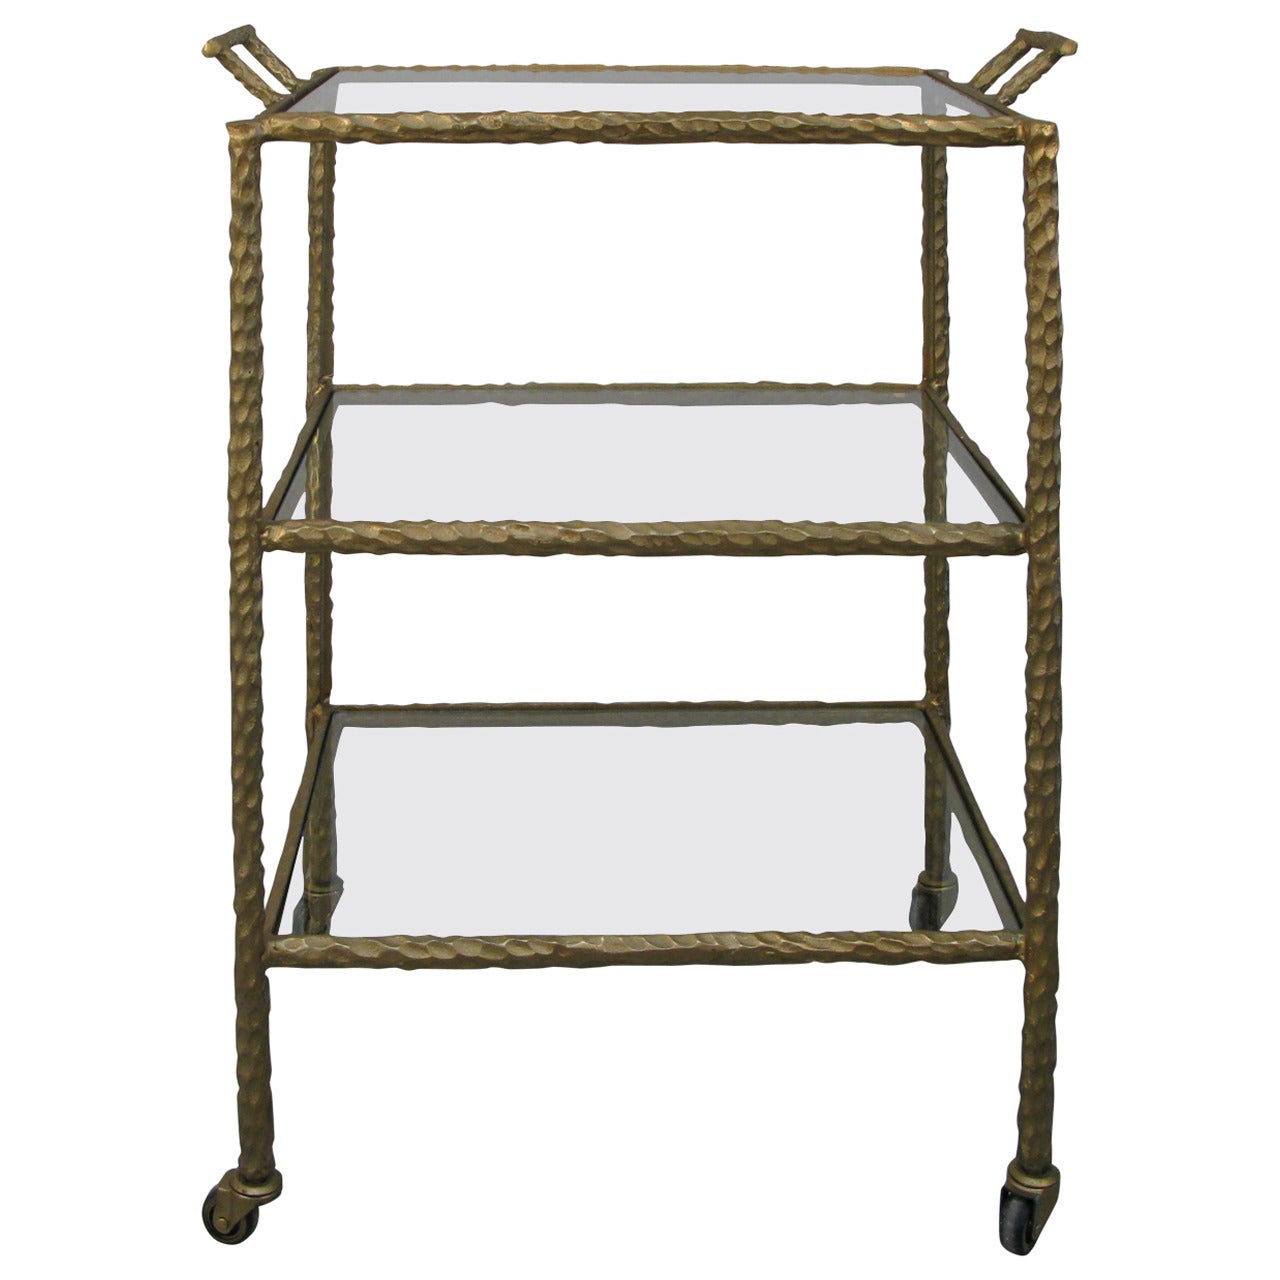 1950s Iron Bar or Serving Cart in a Gold Cold Painted Finish For Sale